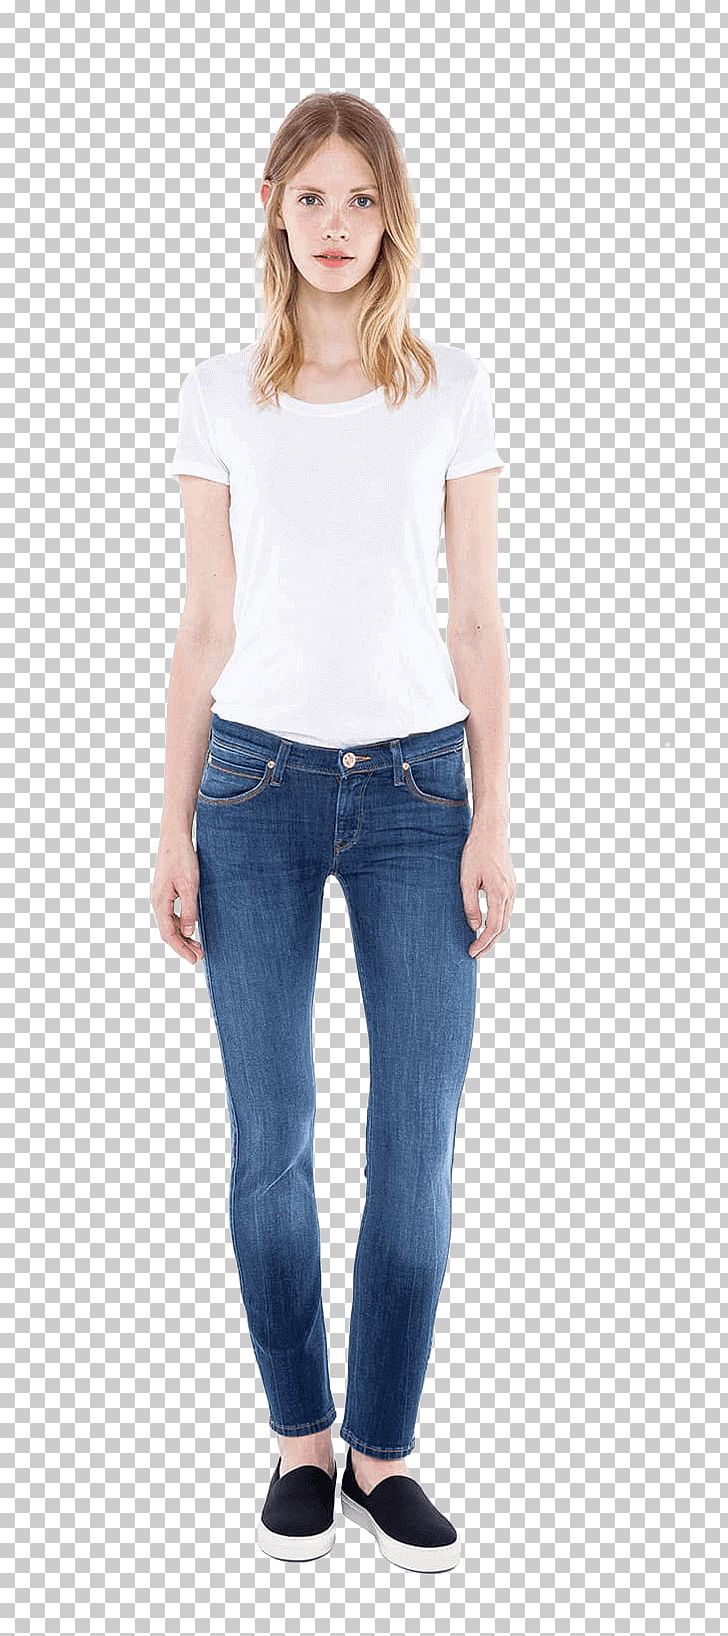 Jeans T-shirt Pants Clothing Passform PNG, Clipart, Abdomen, Blue, Casual, Clothing, Denim Free PNG Download